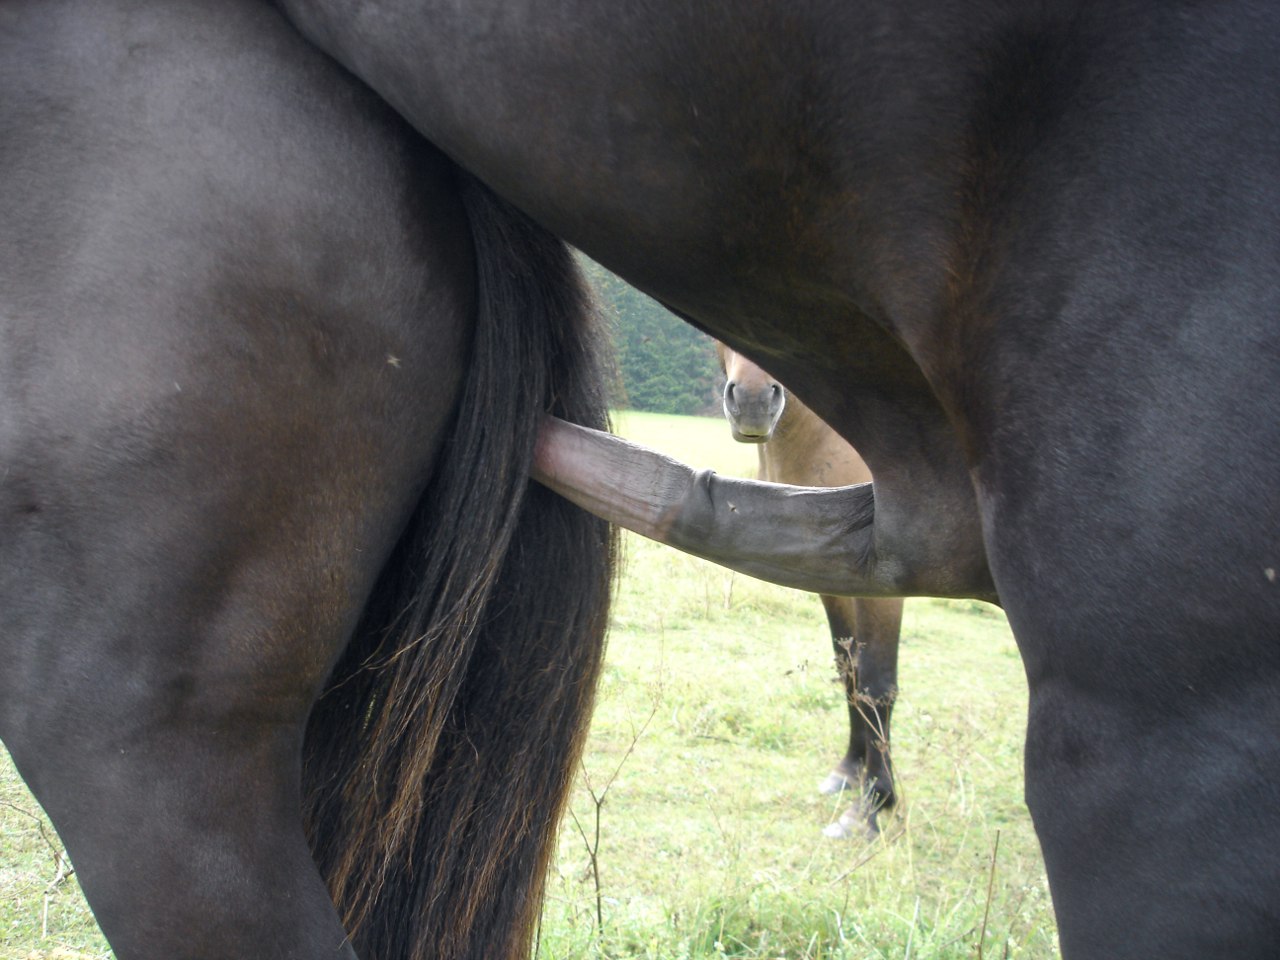 Humans mating with horses